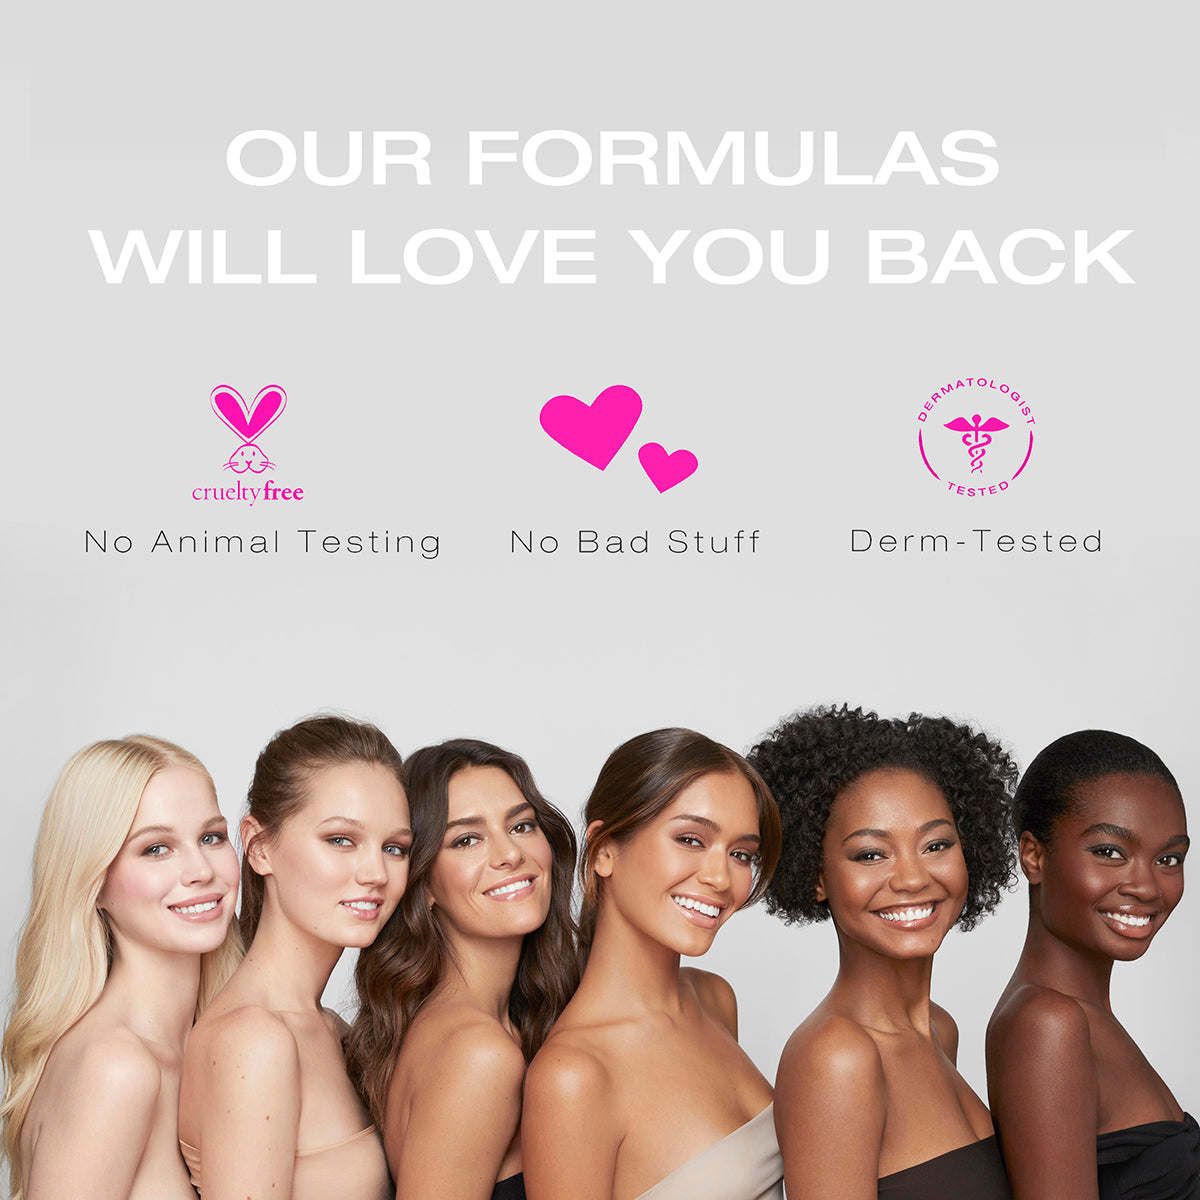 an image of 6 women of different skin tones that also states that the formulas in the Woosh Beauty Fold Out Face are dermatologist-tested, contain no bad ingredients and have not been tested on animals